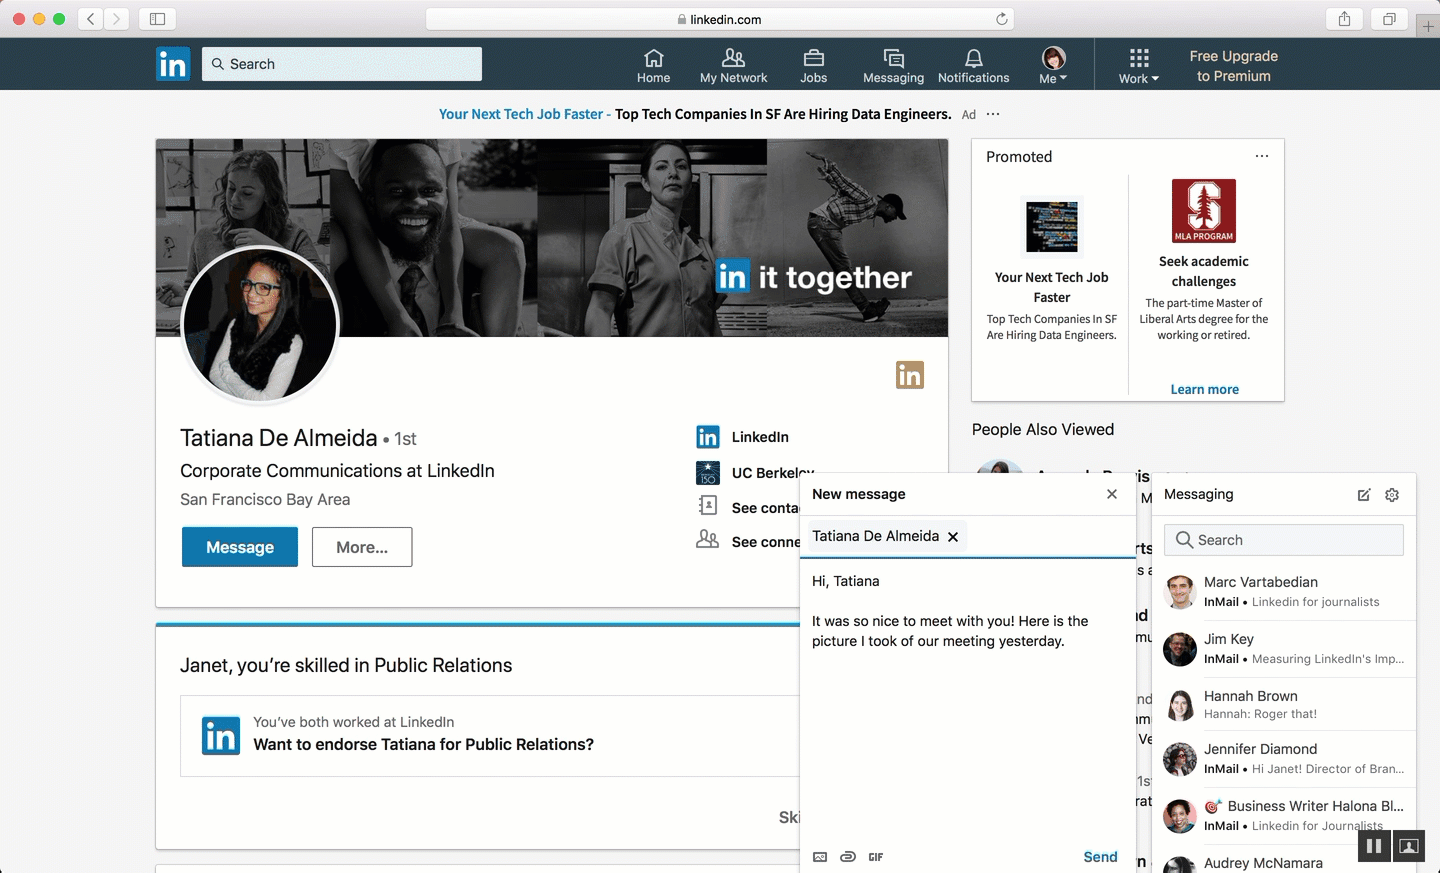 How do you start a conversation with a girl on linkedin?